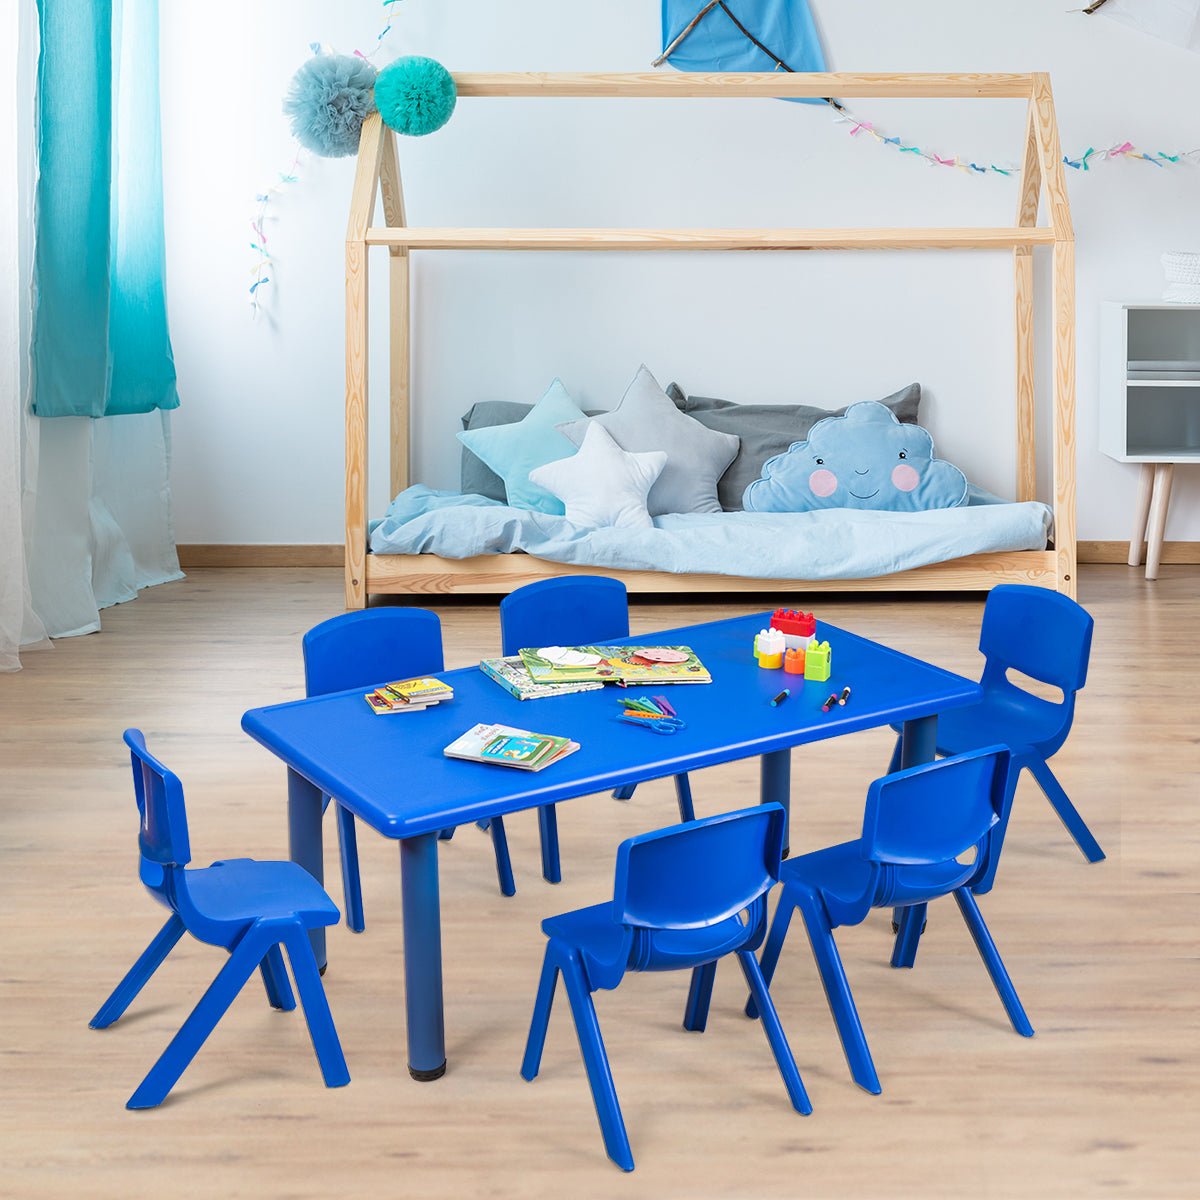 Children's Table and 6 Chairs Set - Enhance Learning in Preschools and Homes